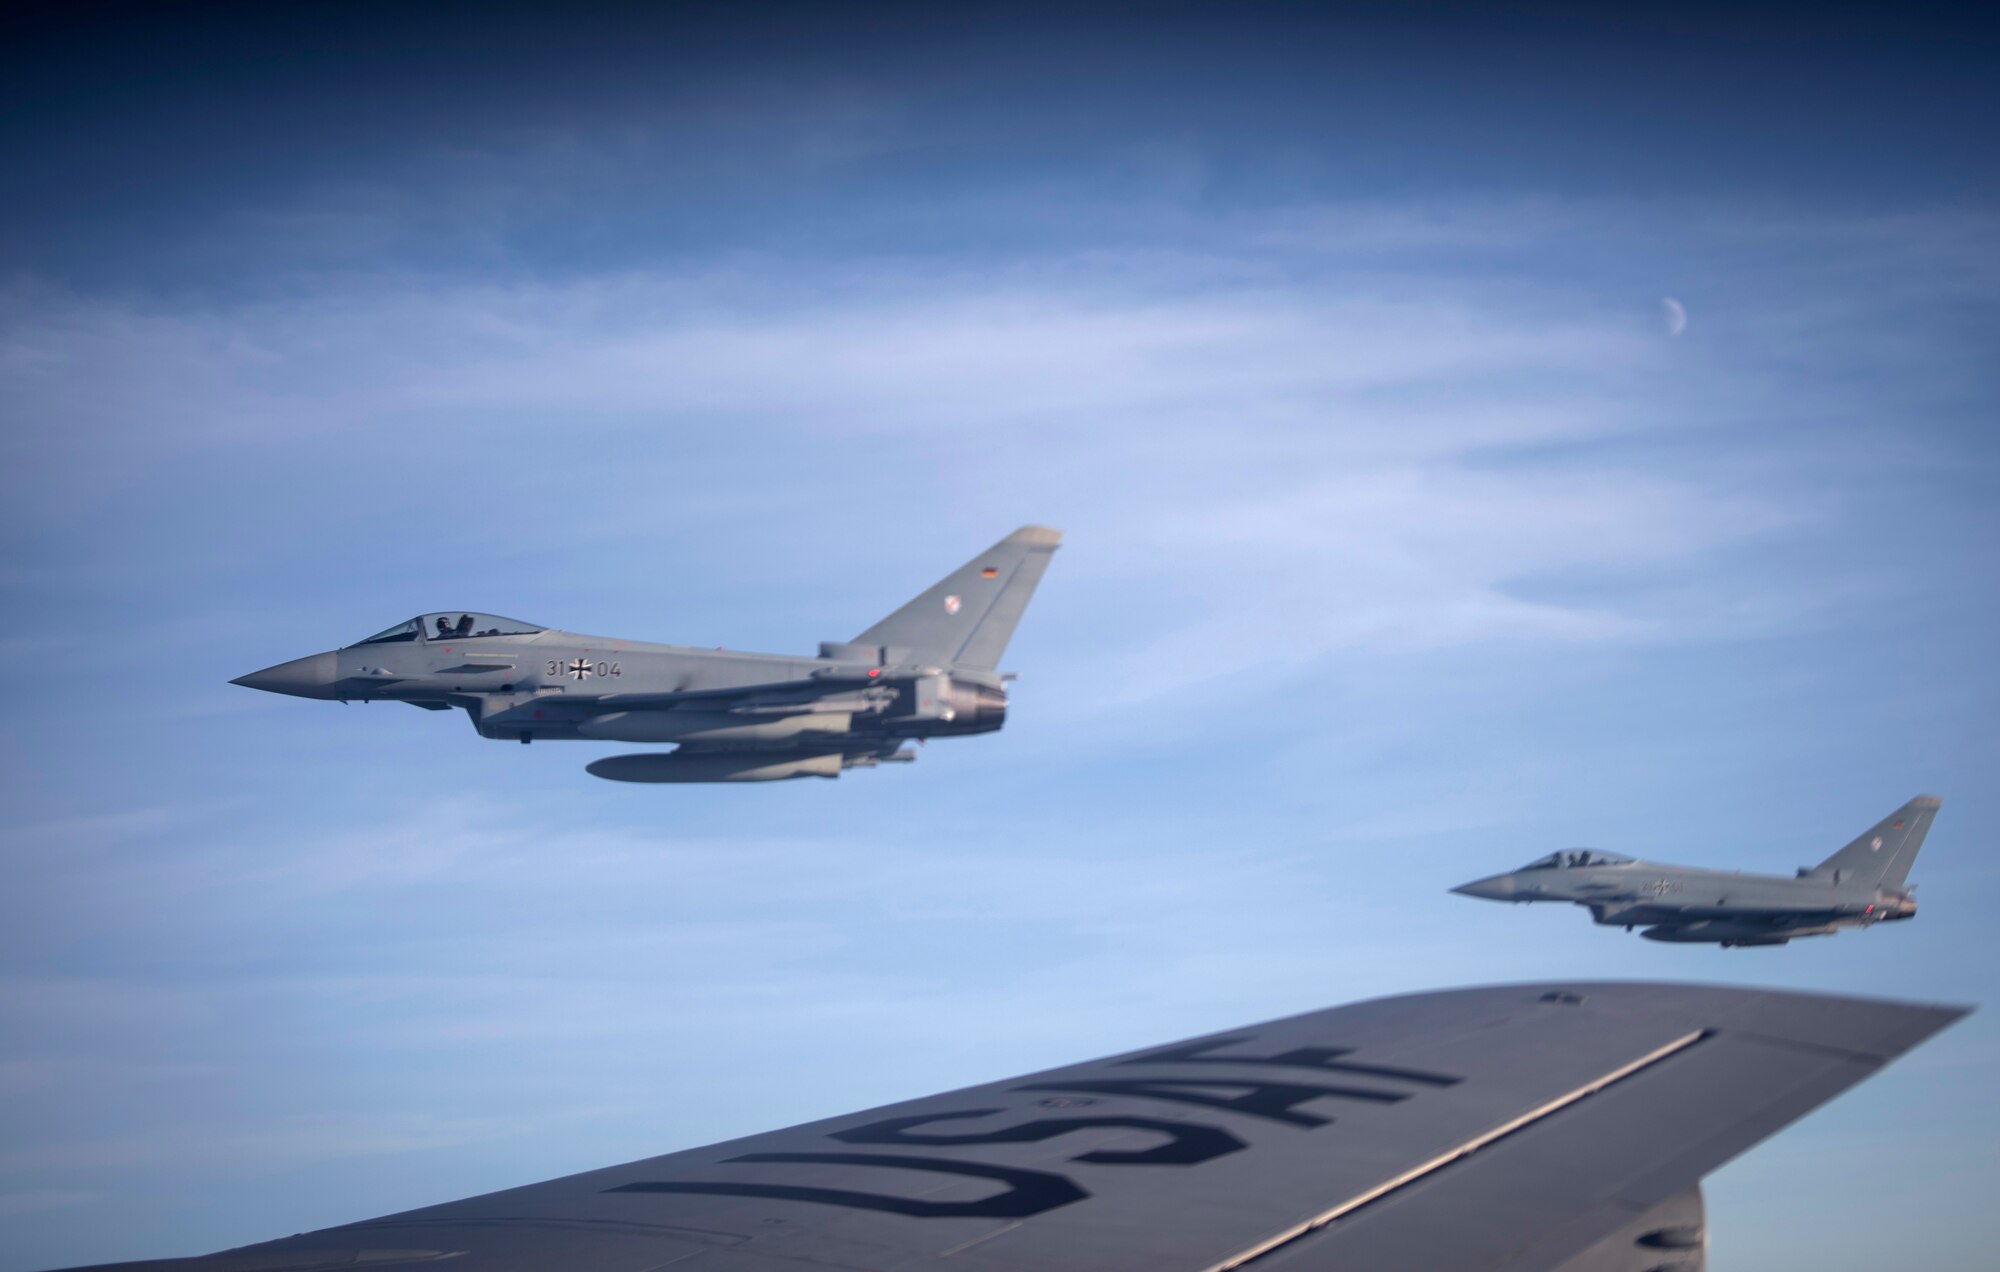 German air force Eurofighter Typhoons wait to receive fuel over Germany from a U.S. Air Force KC-135 Stratotanker from the 100th Air Refueling Wing, RAF Mildenhall, England, Dec 4, 2019. The Bloody Hundredth provides unrivaled air refueling support throughout Europe and Africa. (U.S. Air Force photo by Tech. Sgt. Emerson Nuñez)